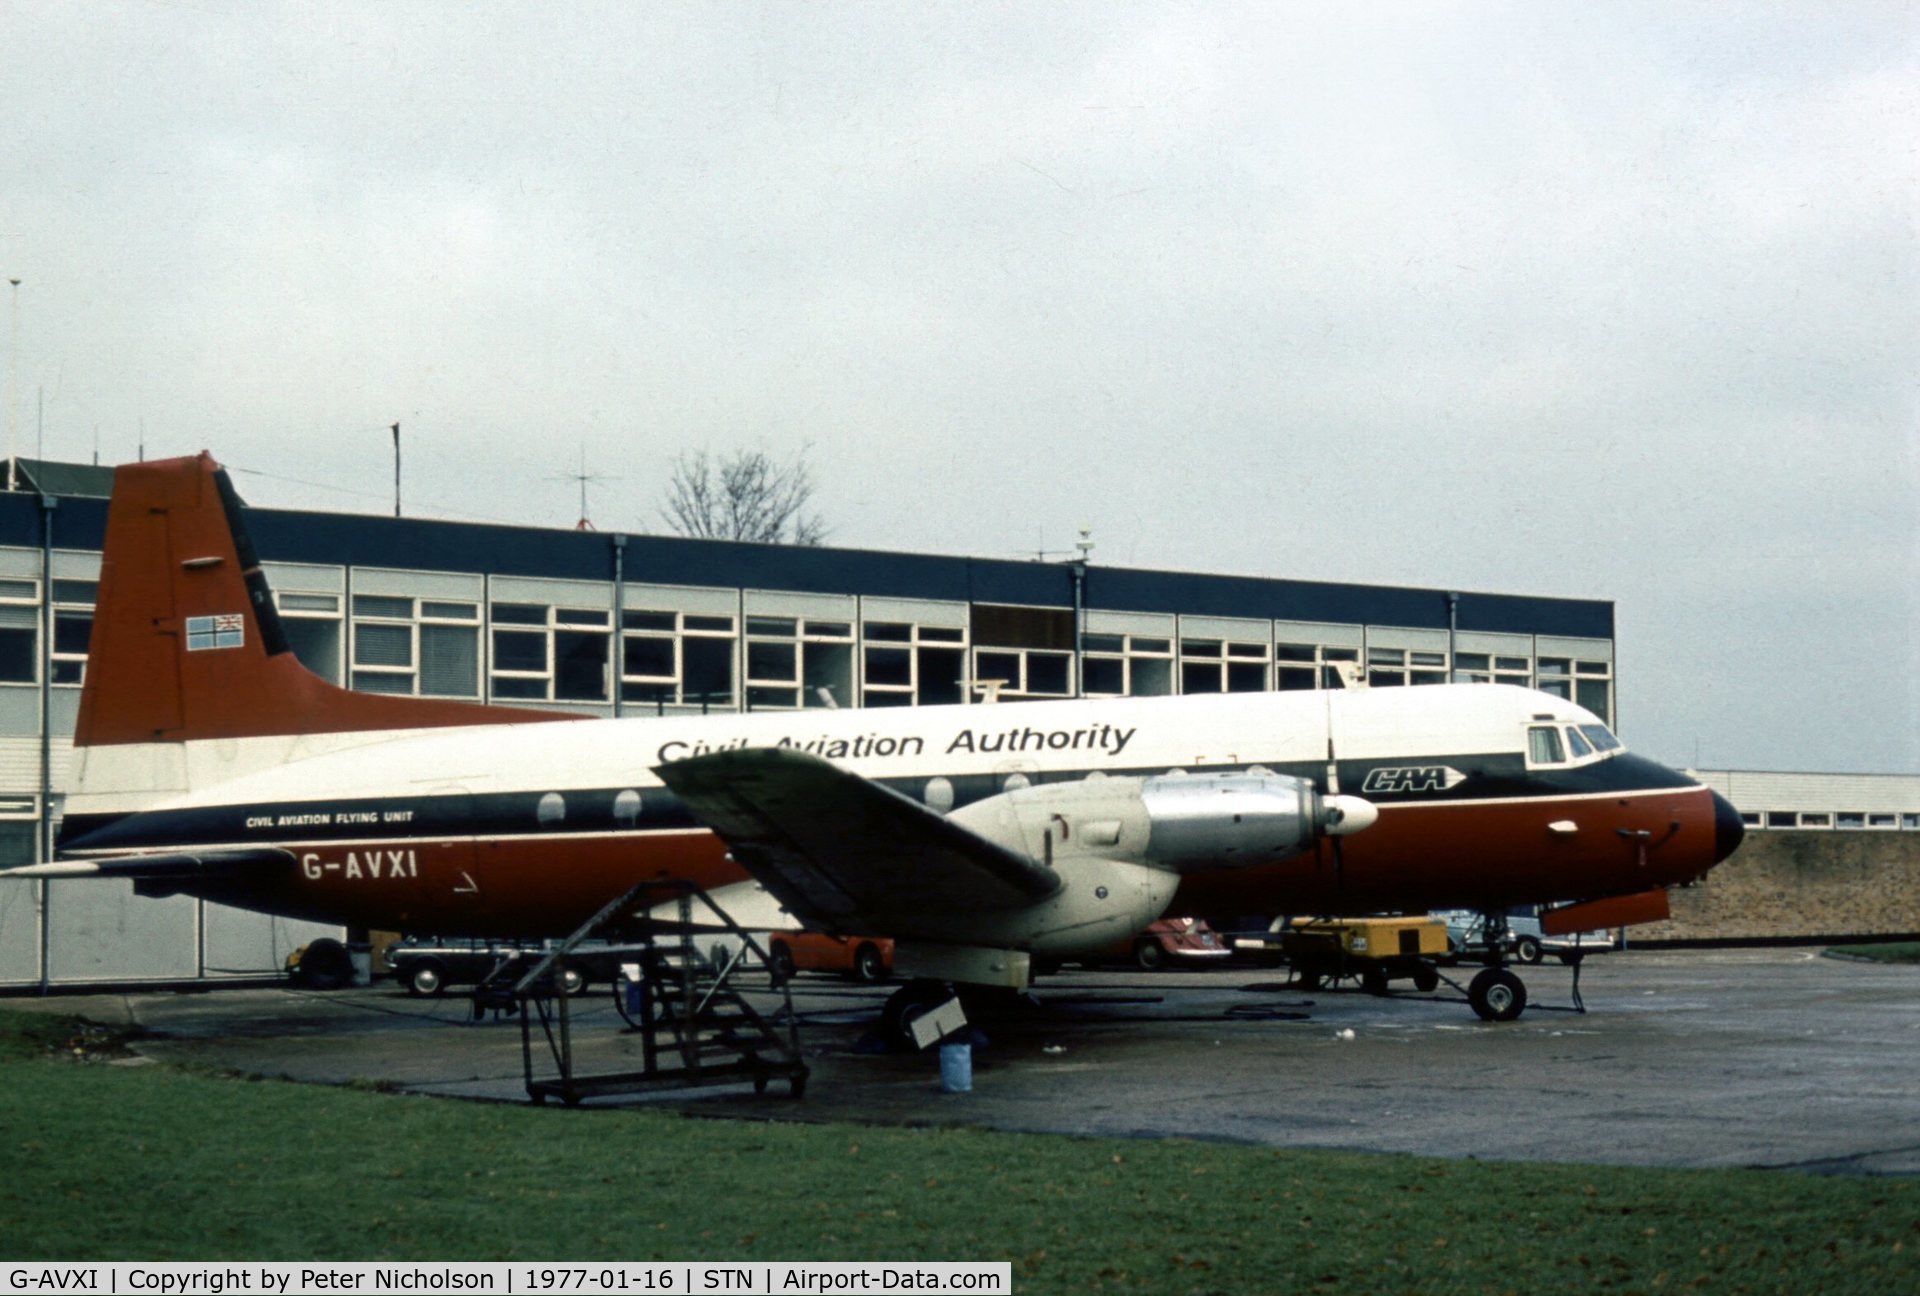 G-AVXI, 1968 Hawker Siddeley HS.748 Series 2A C/N 1623, HS.748 of the Civil Aviation Authority at their Stansted base in January 1977.